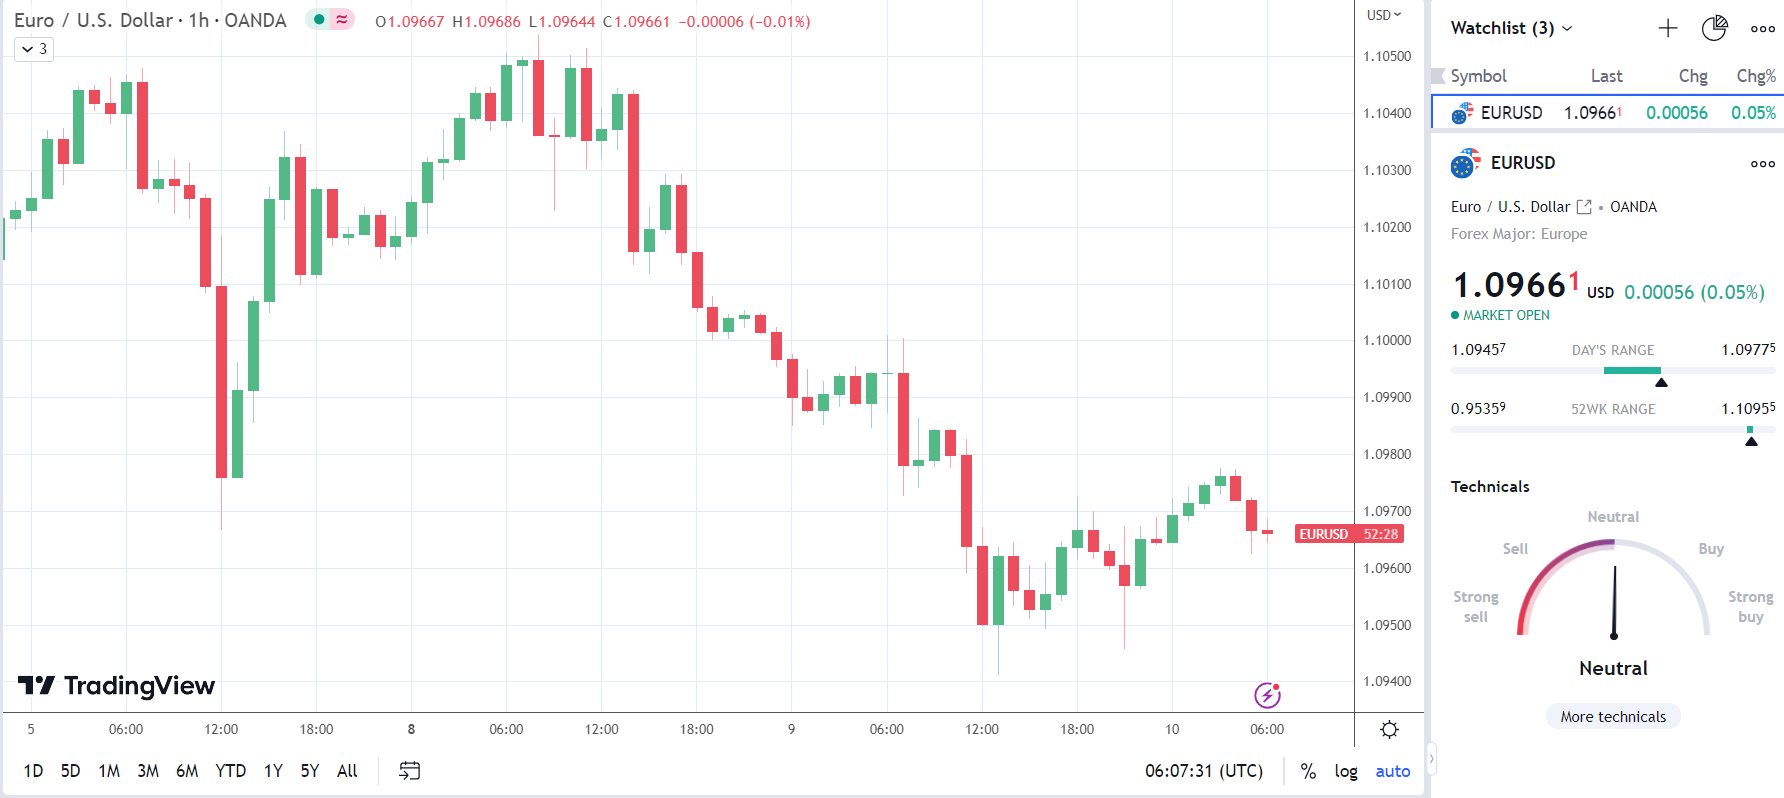 EUR/USD has mixed reaction to German inflation.